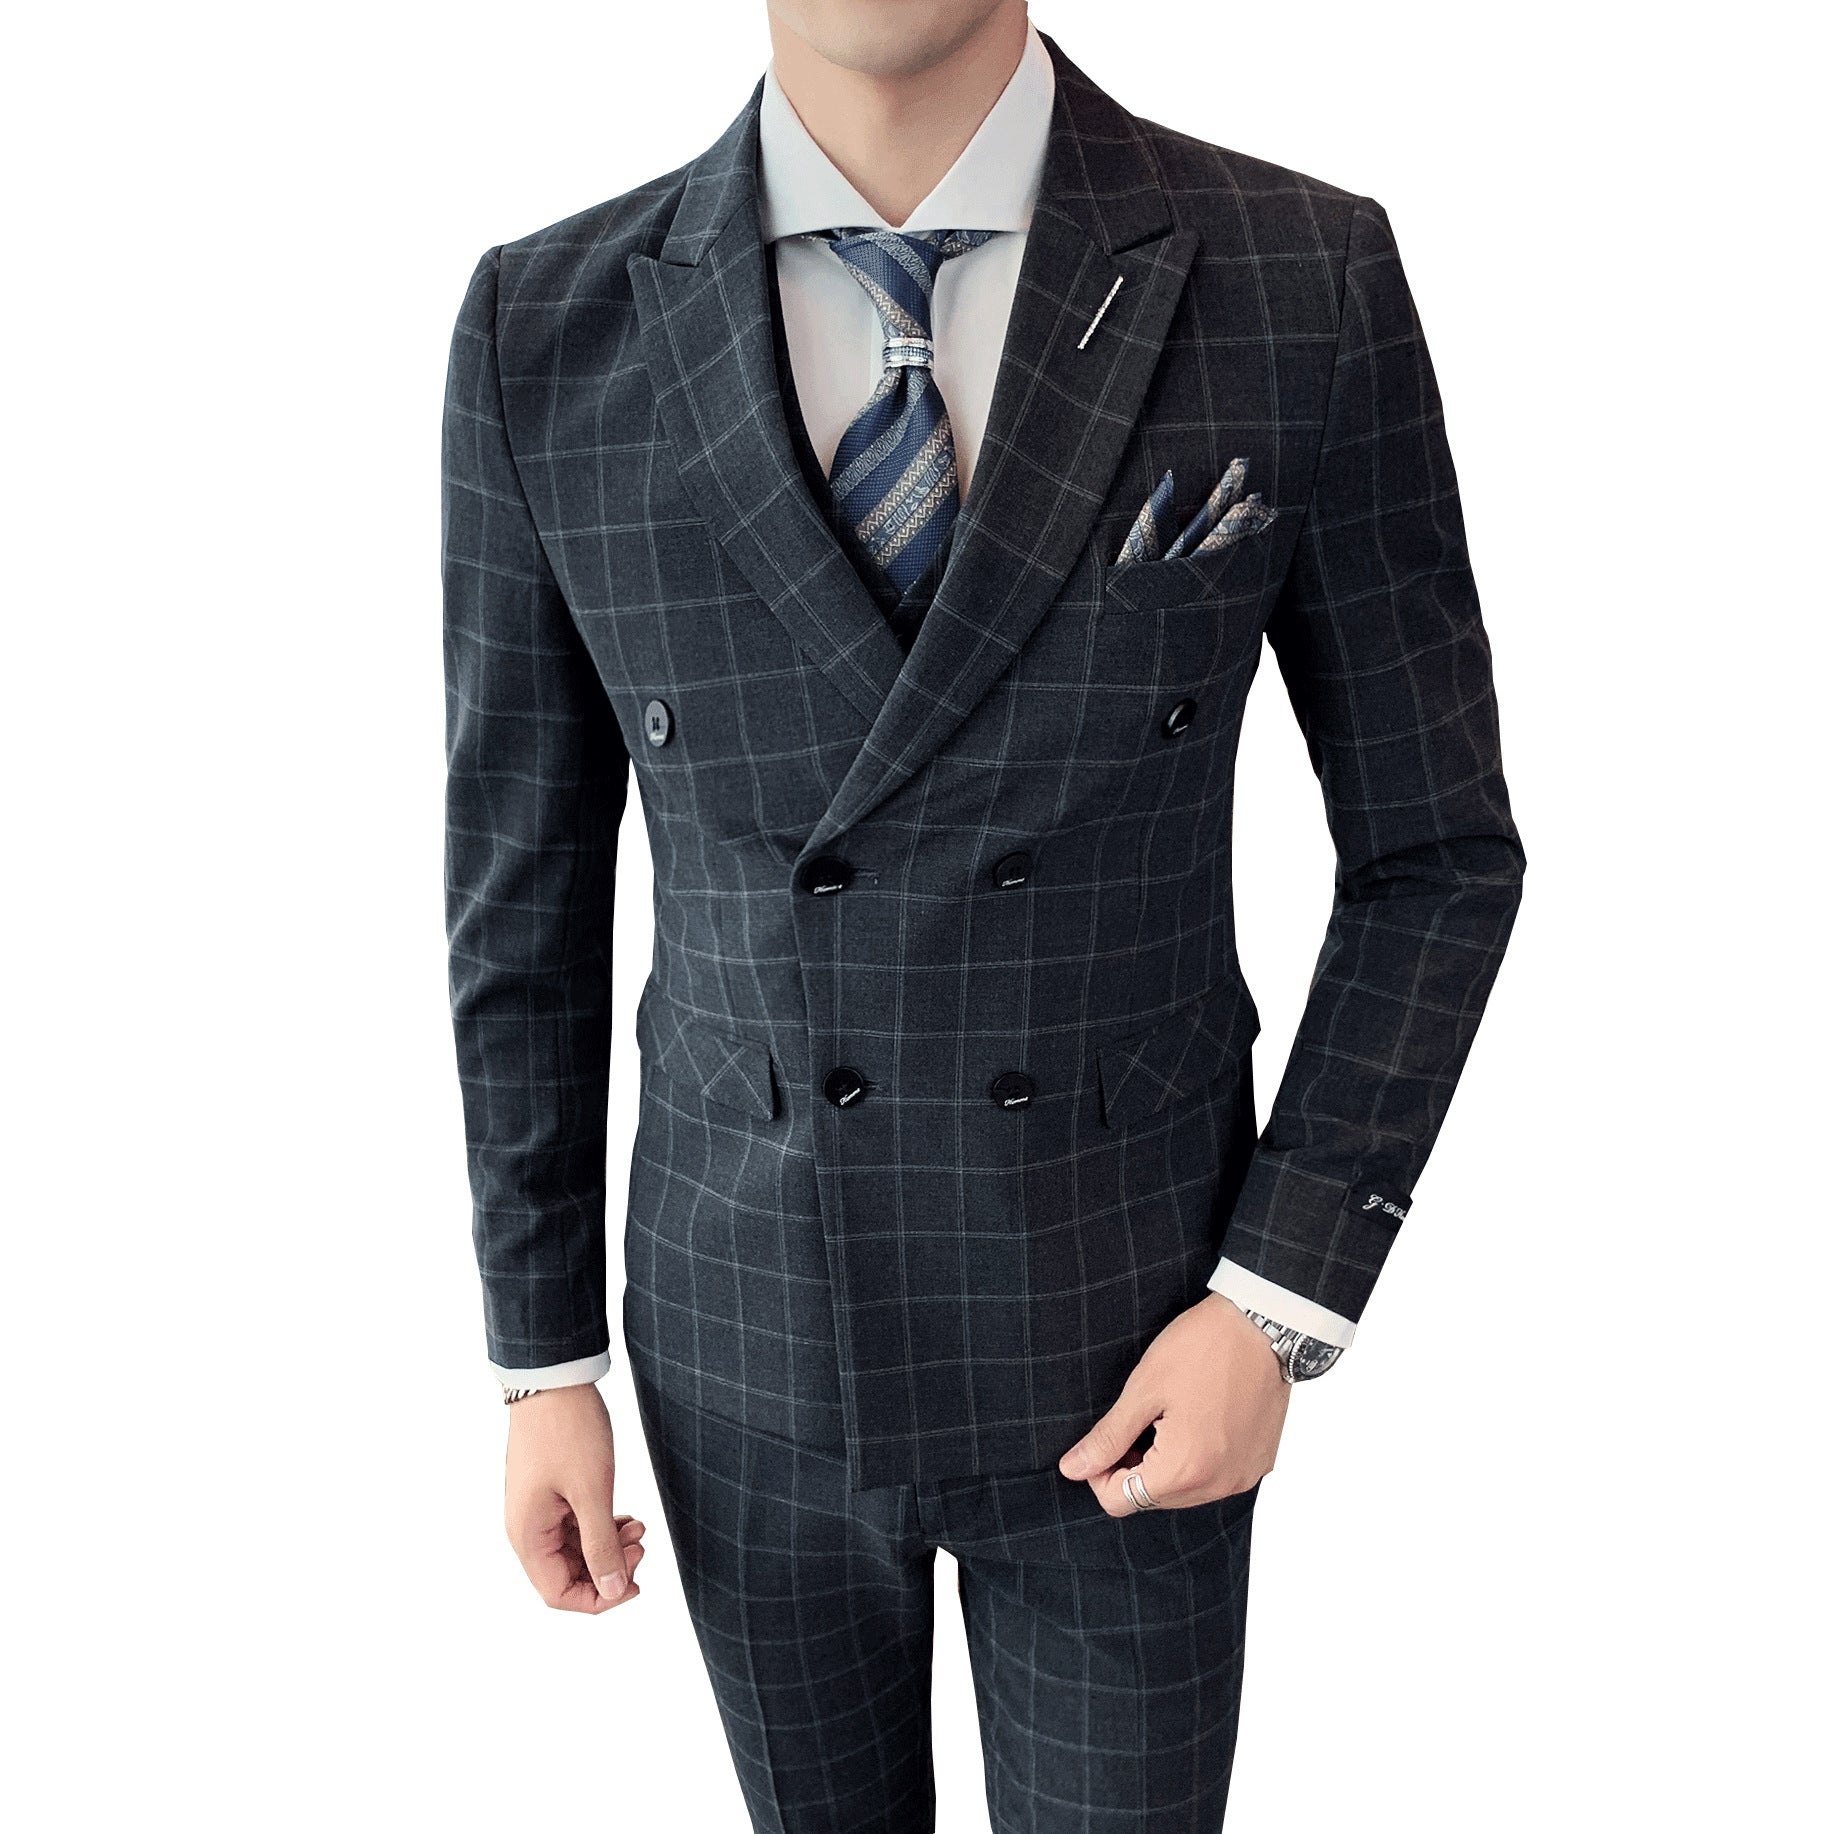 Men's Casual Business Suit Three-piece Slim-fit Officiating Ceremony